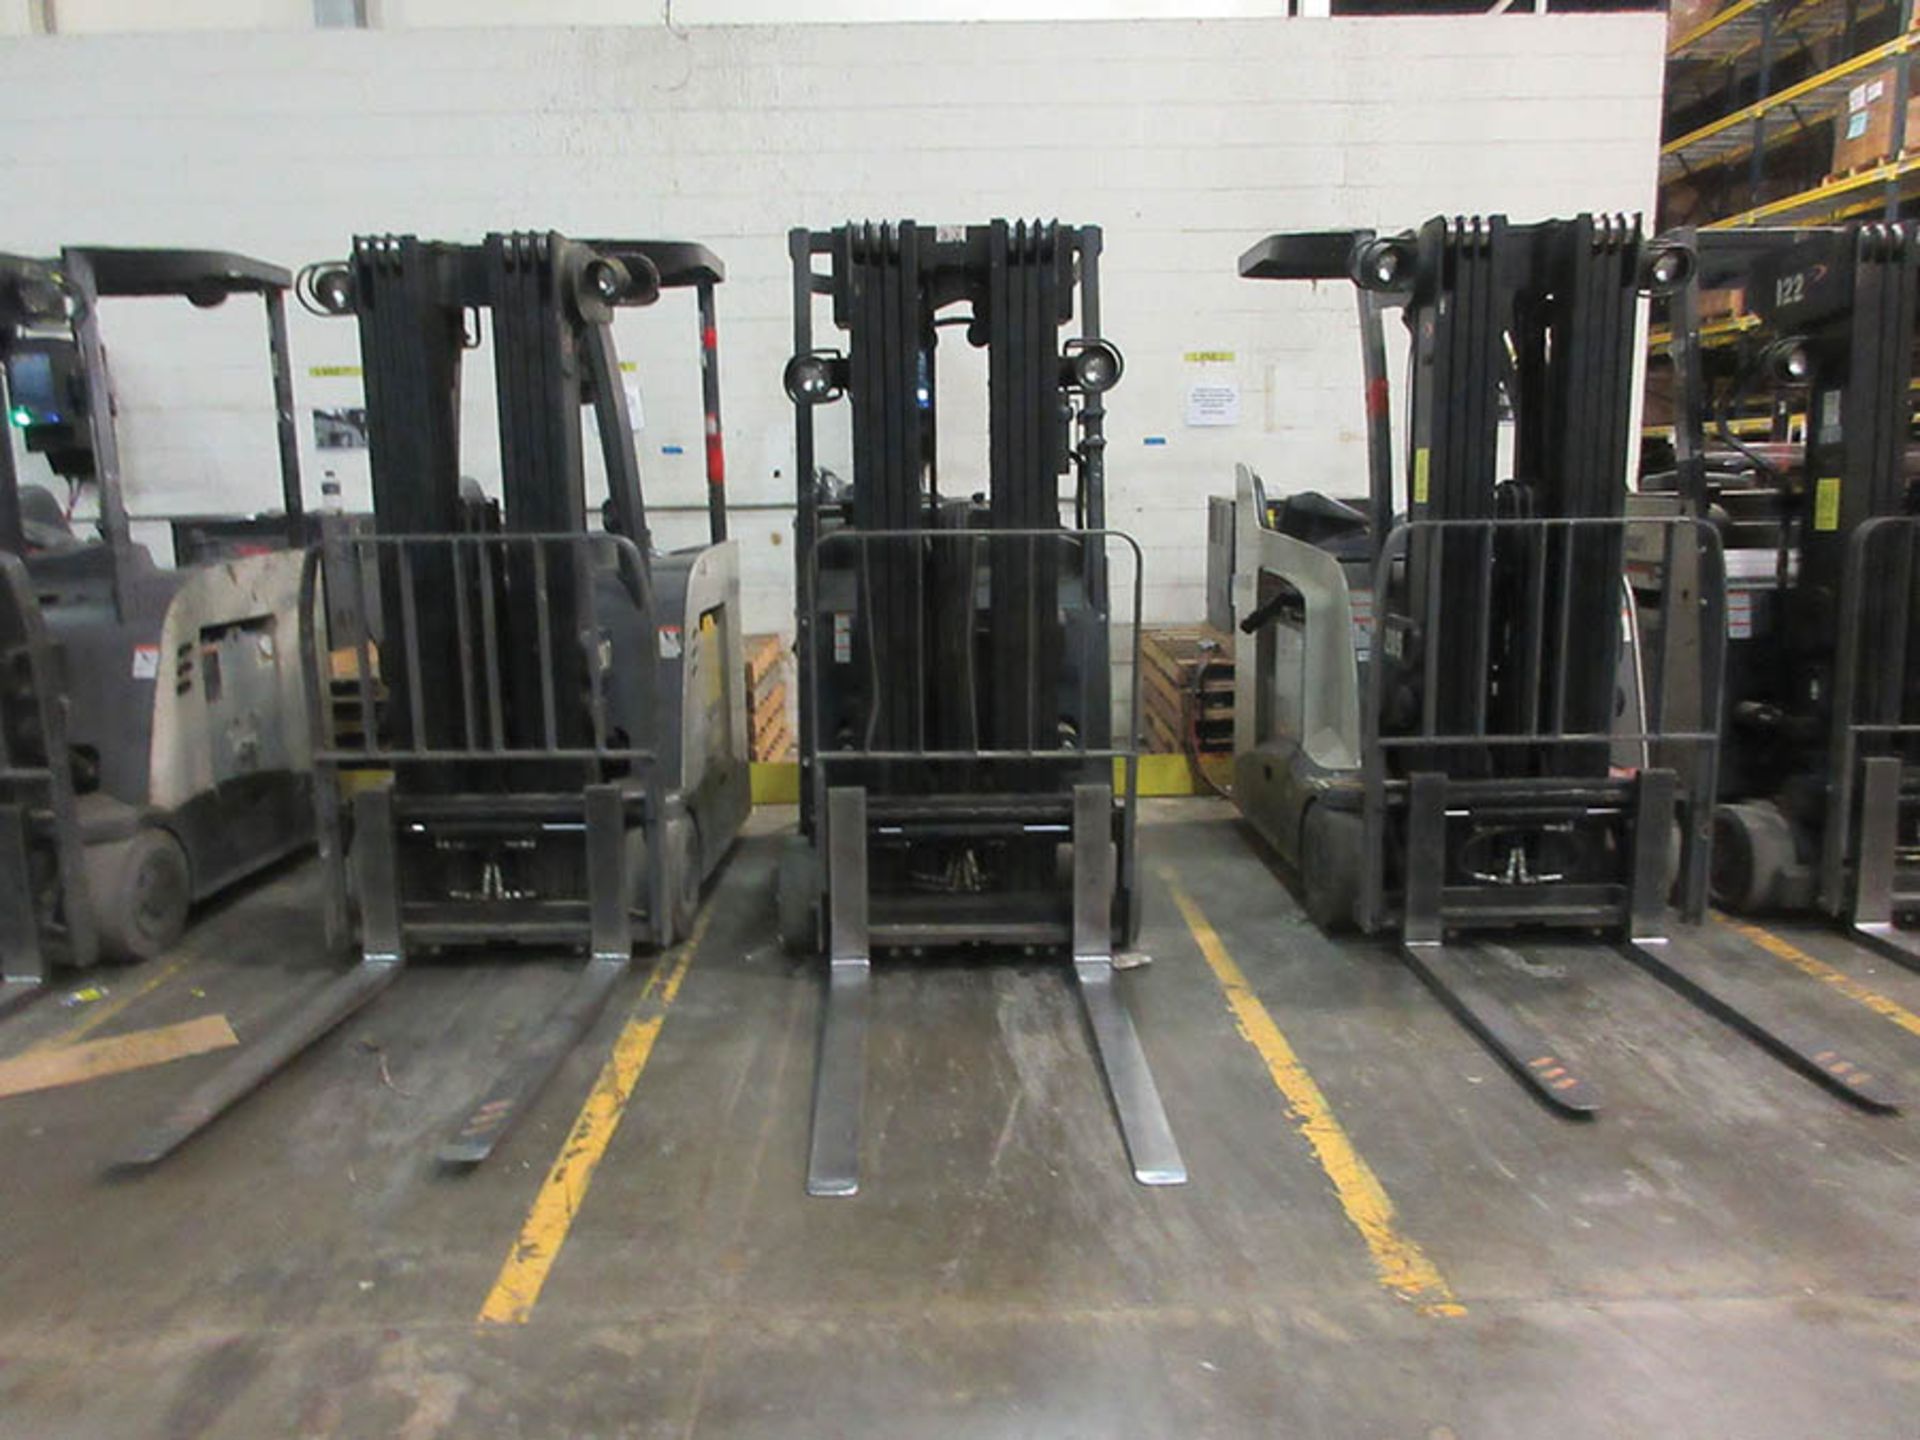 2004 CROWN STAND-UP FORKLIFT, 4,000 LB. CAP., MODEL: RC3020-40, 36V., 240'' MAX. LOAD HEIGHT, 48''